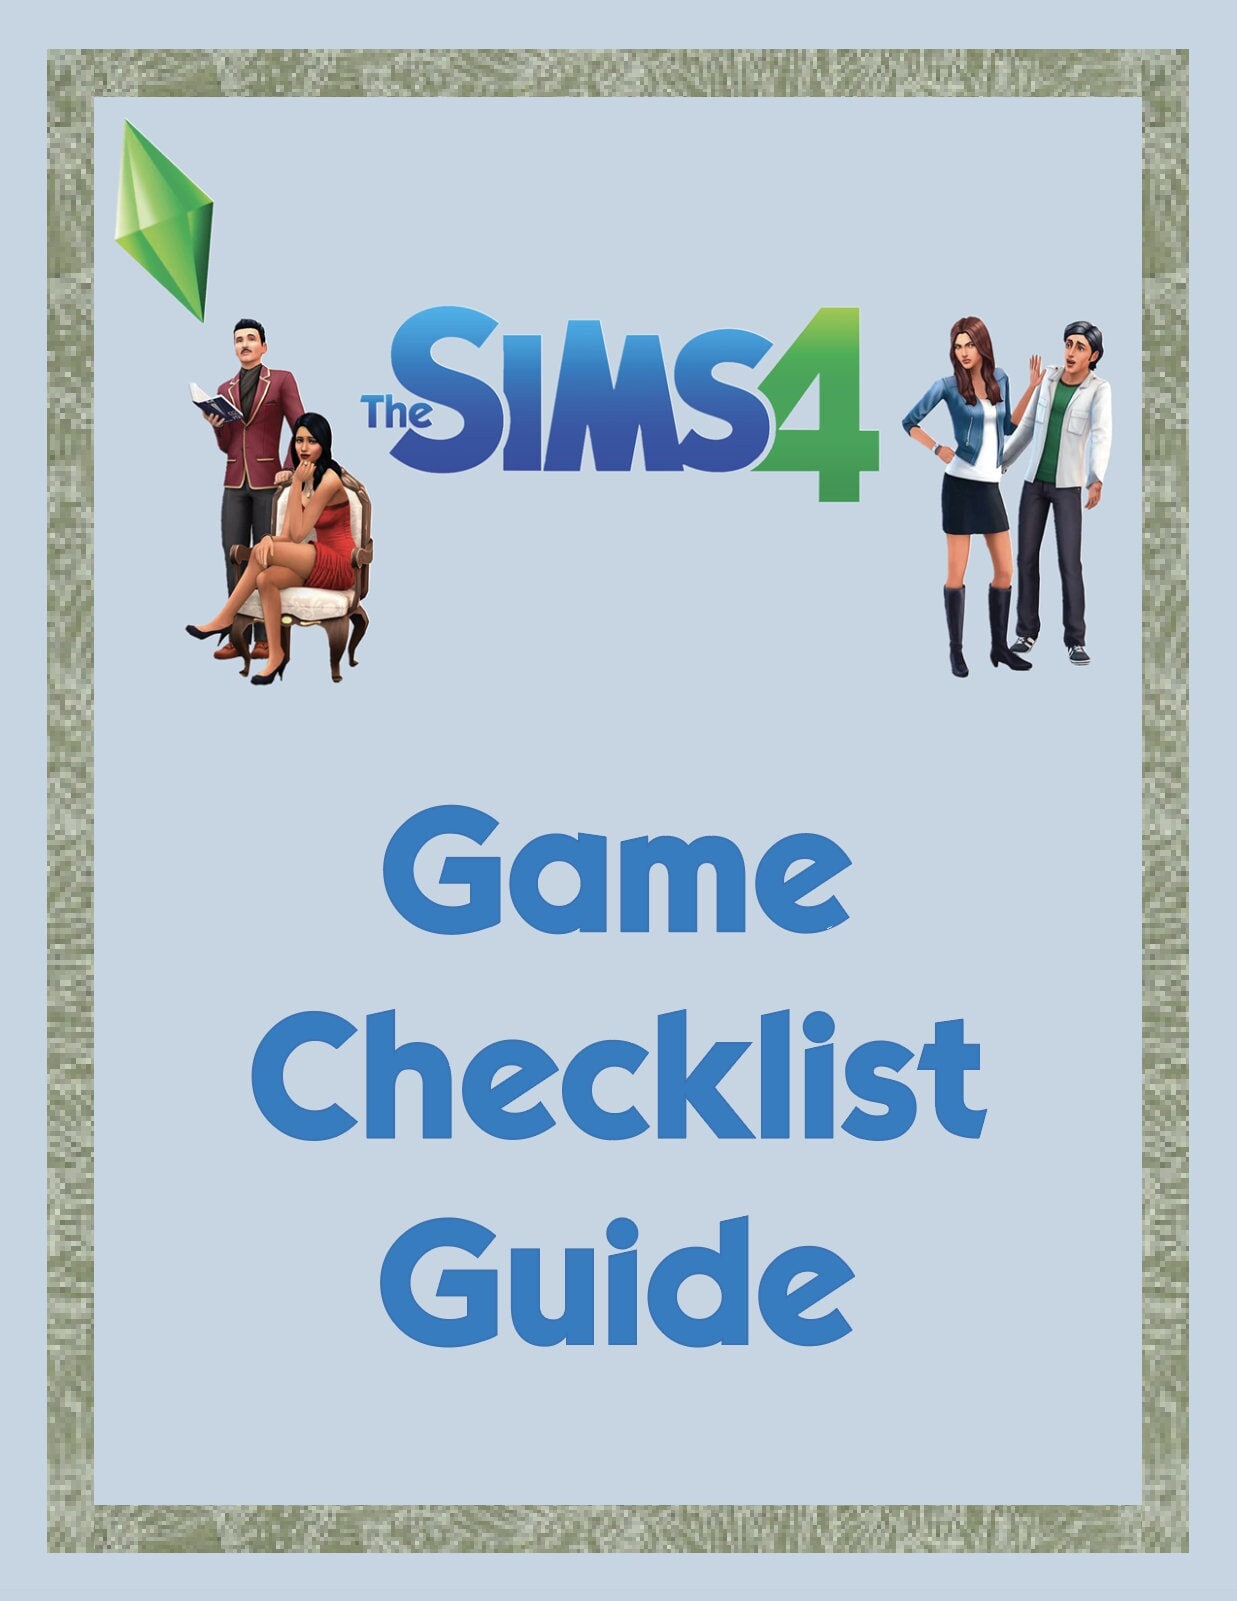 Cheats for Sims 4 + Guides & Videos (unofficial)